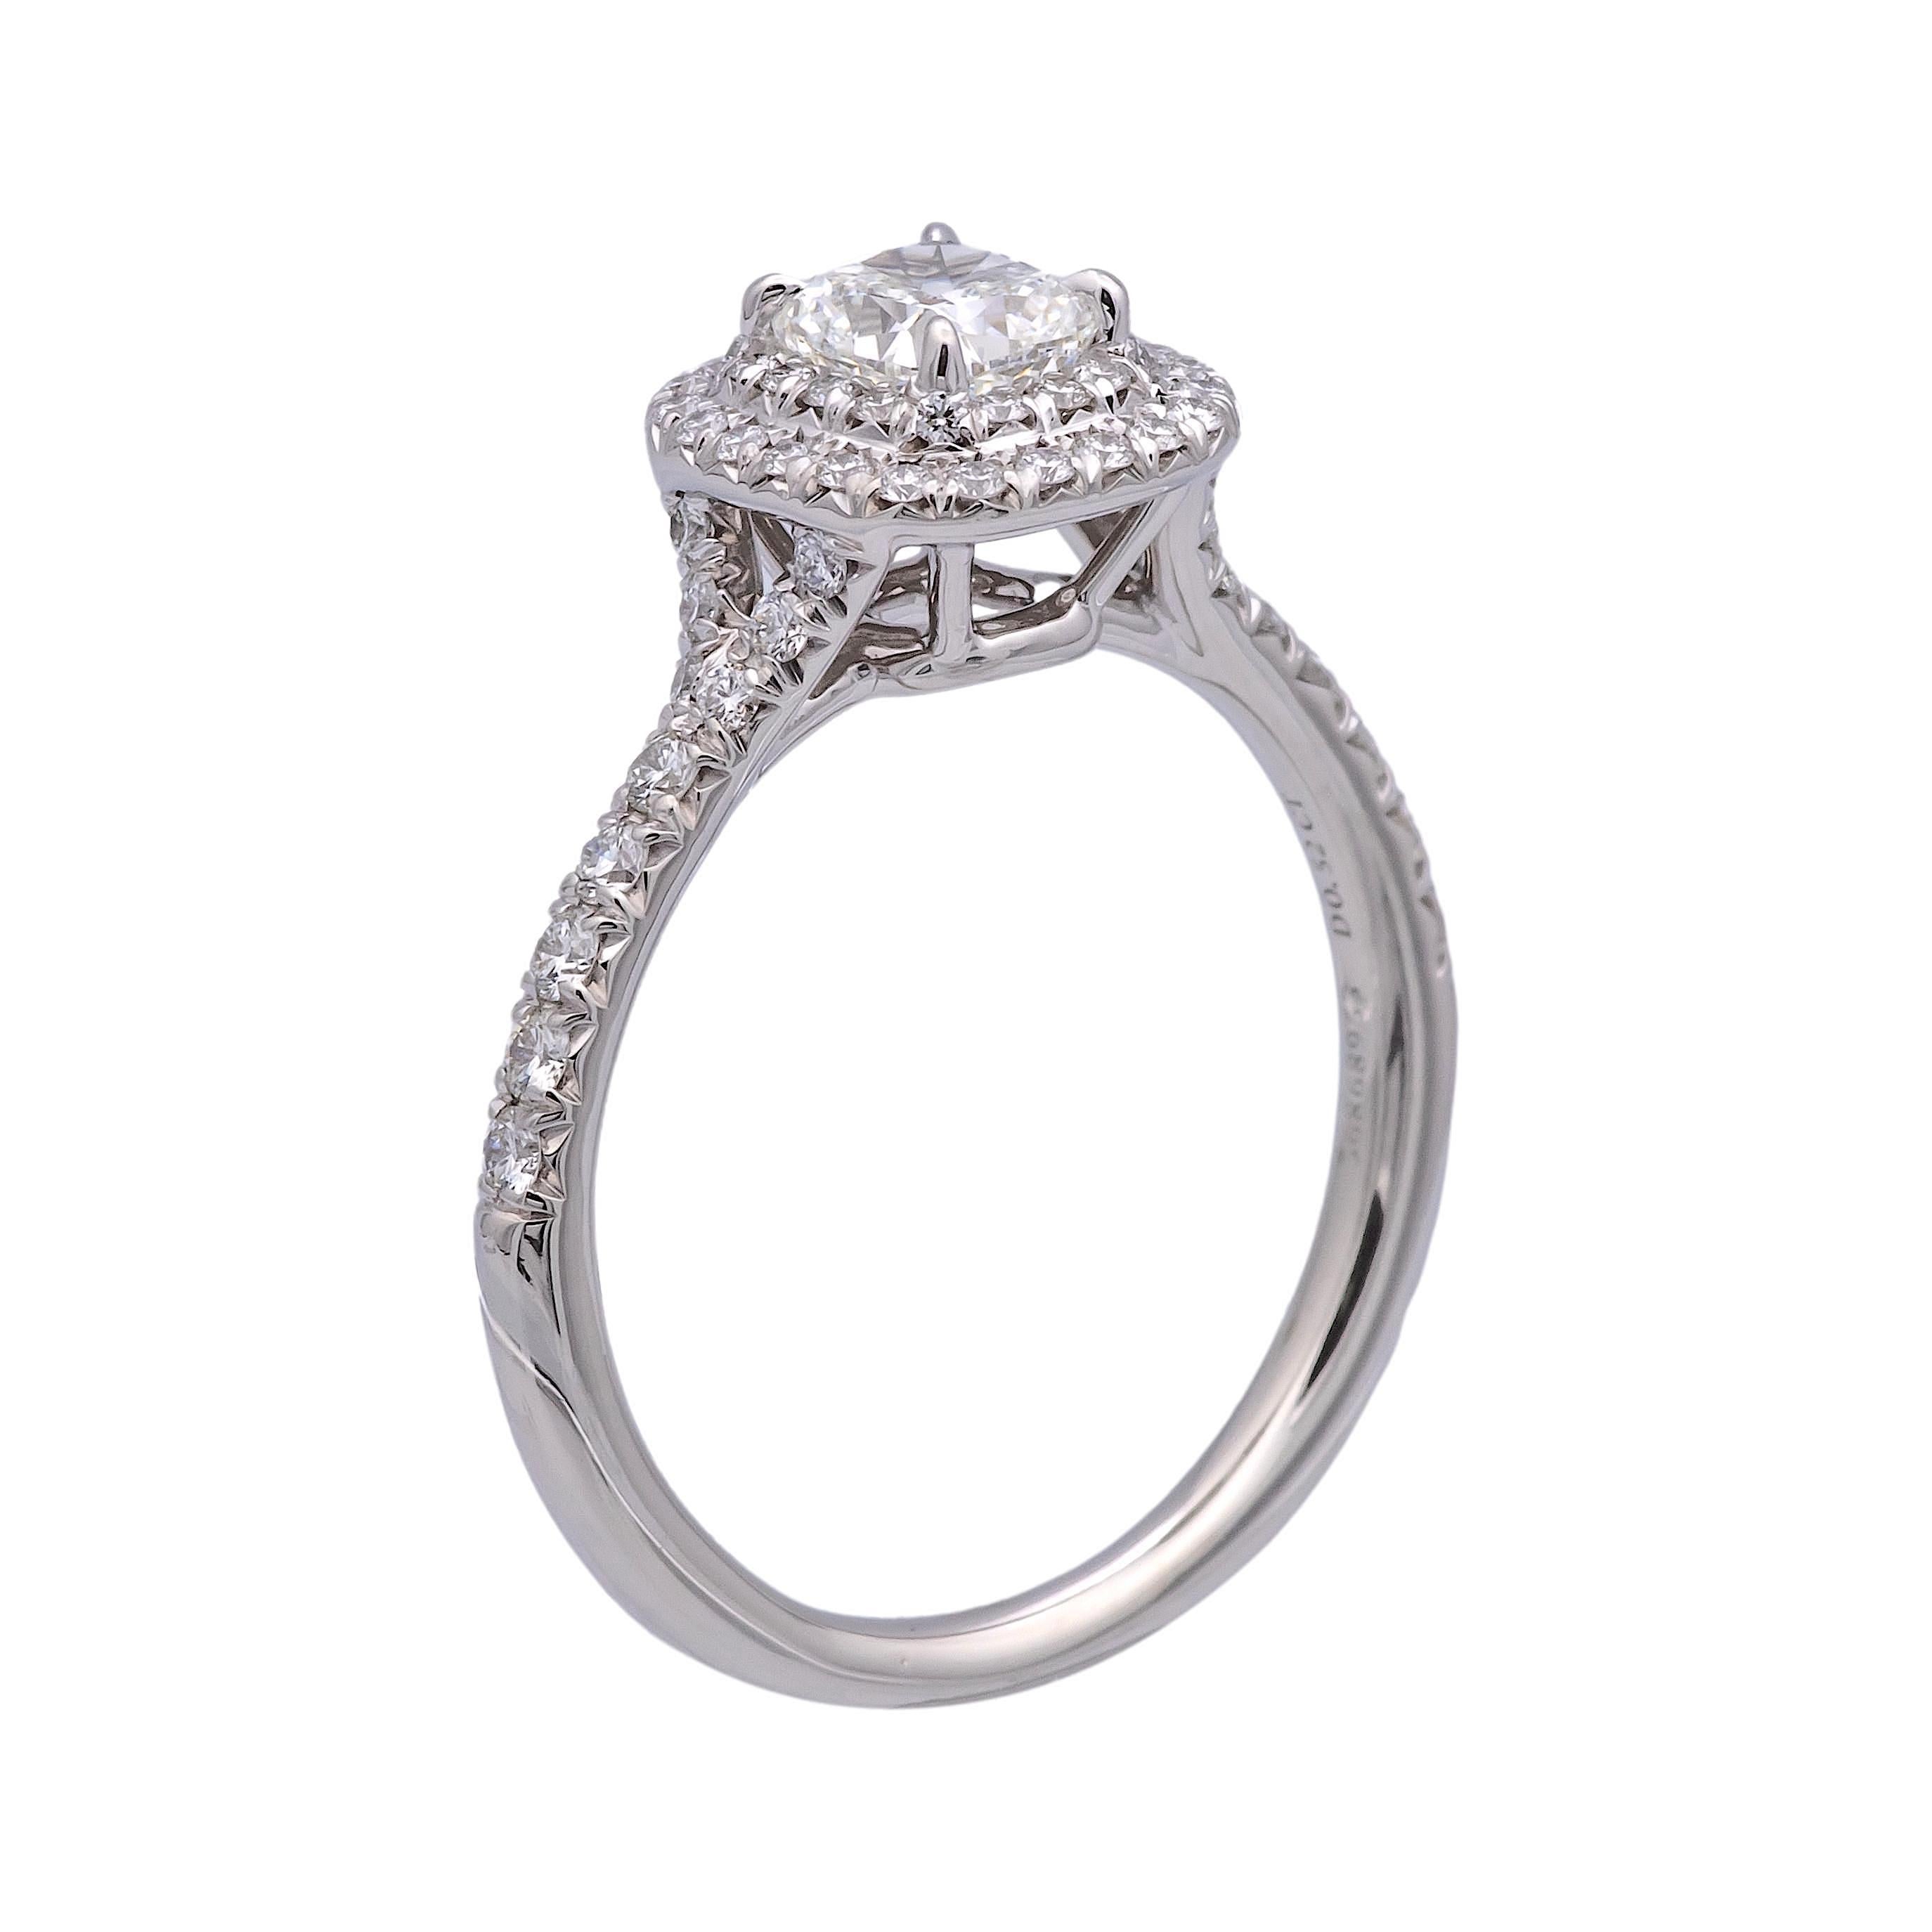 Tiffany & Co. engagement ring from the Novo collection finely crafted in platinum featuring a cushion brilliant diamond center weighing .52 carats , ranging F-G color , VVS2-VS1 clarity set in a 4 prong basket setting accented by a double row halo